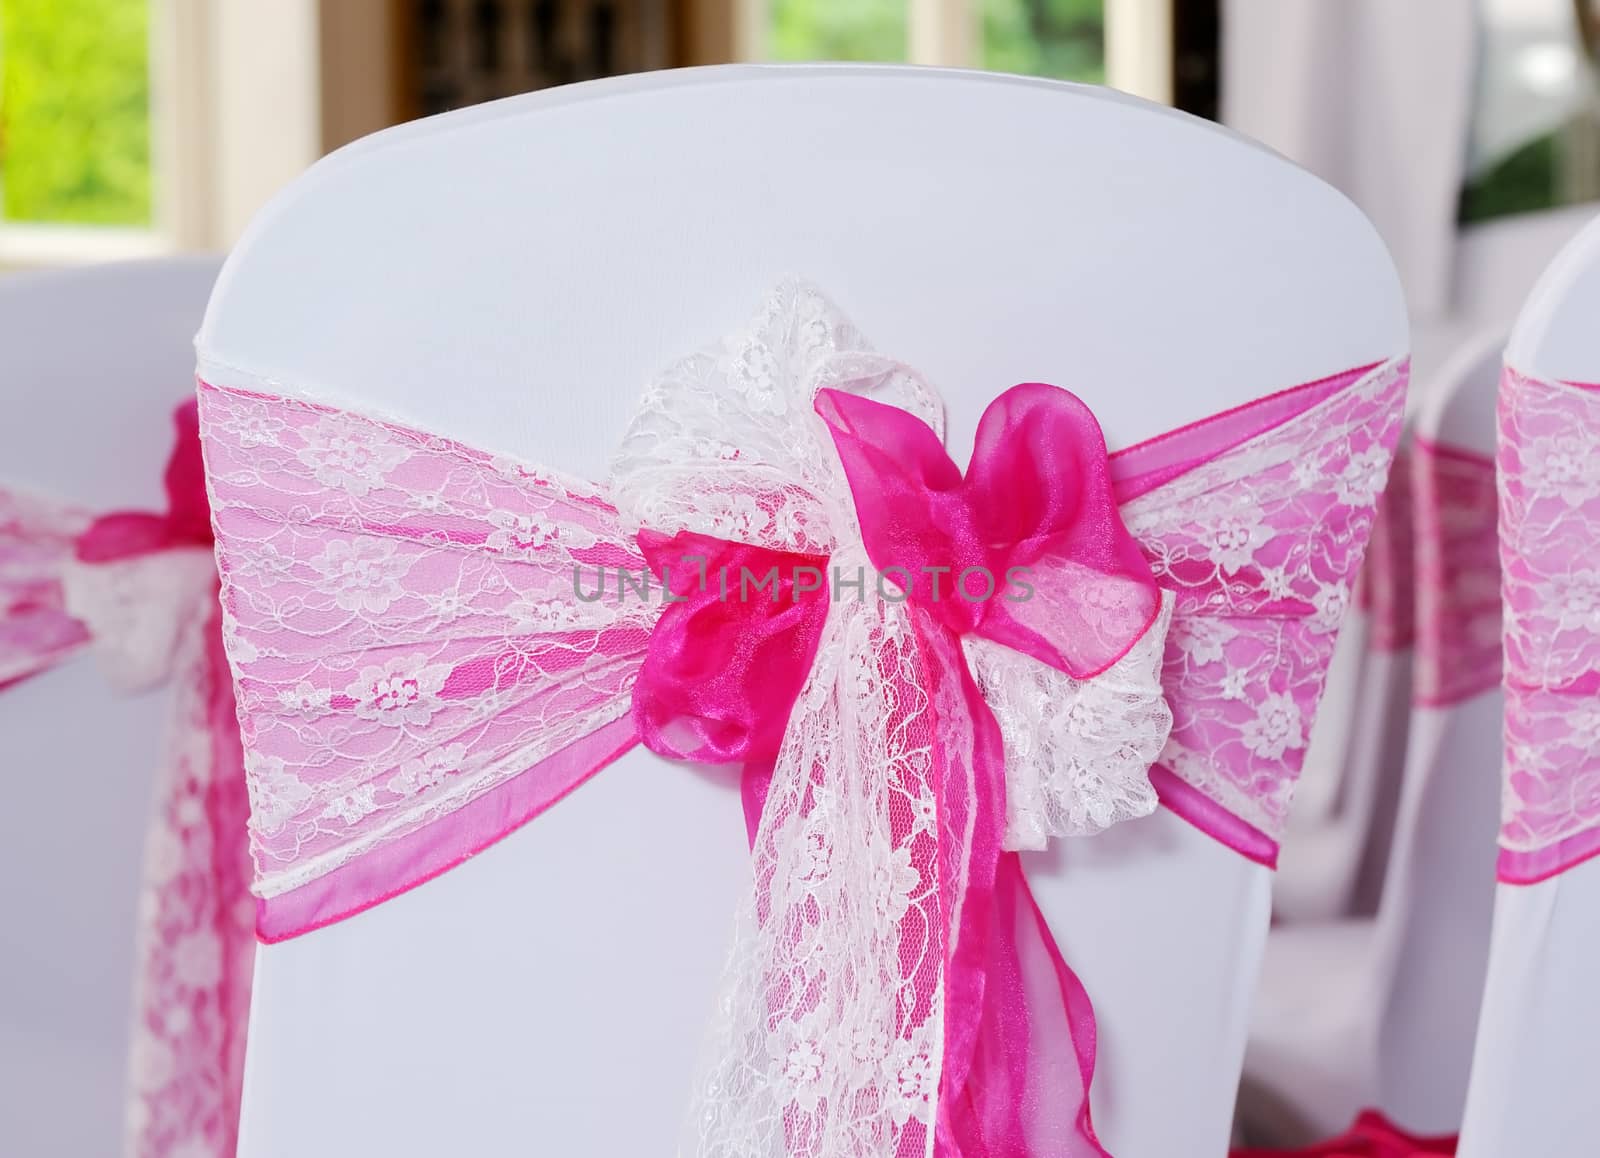 Pink and white chair cover at wedding ceremony showing ornate detail of bow and ribbon